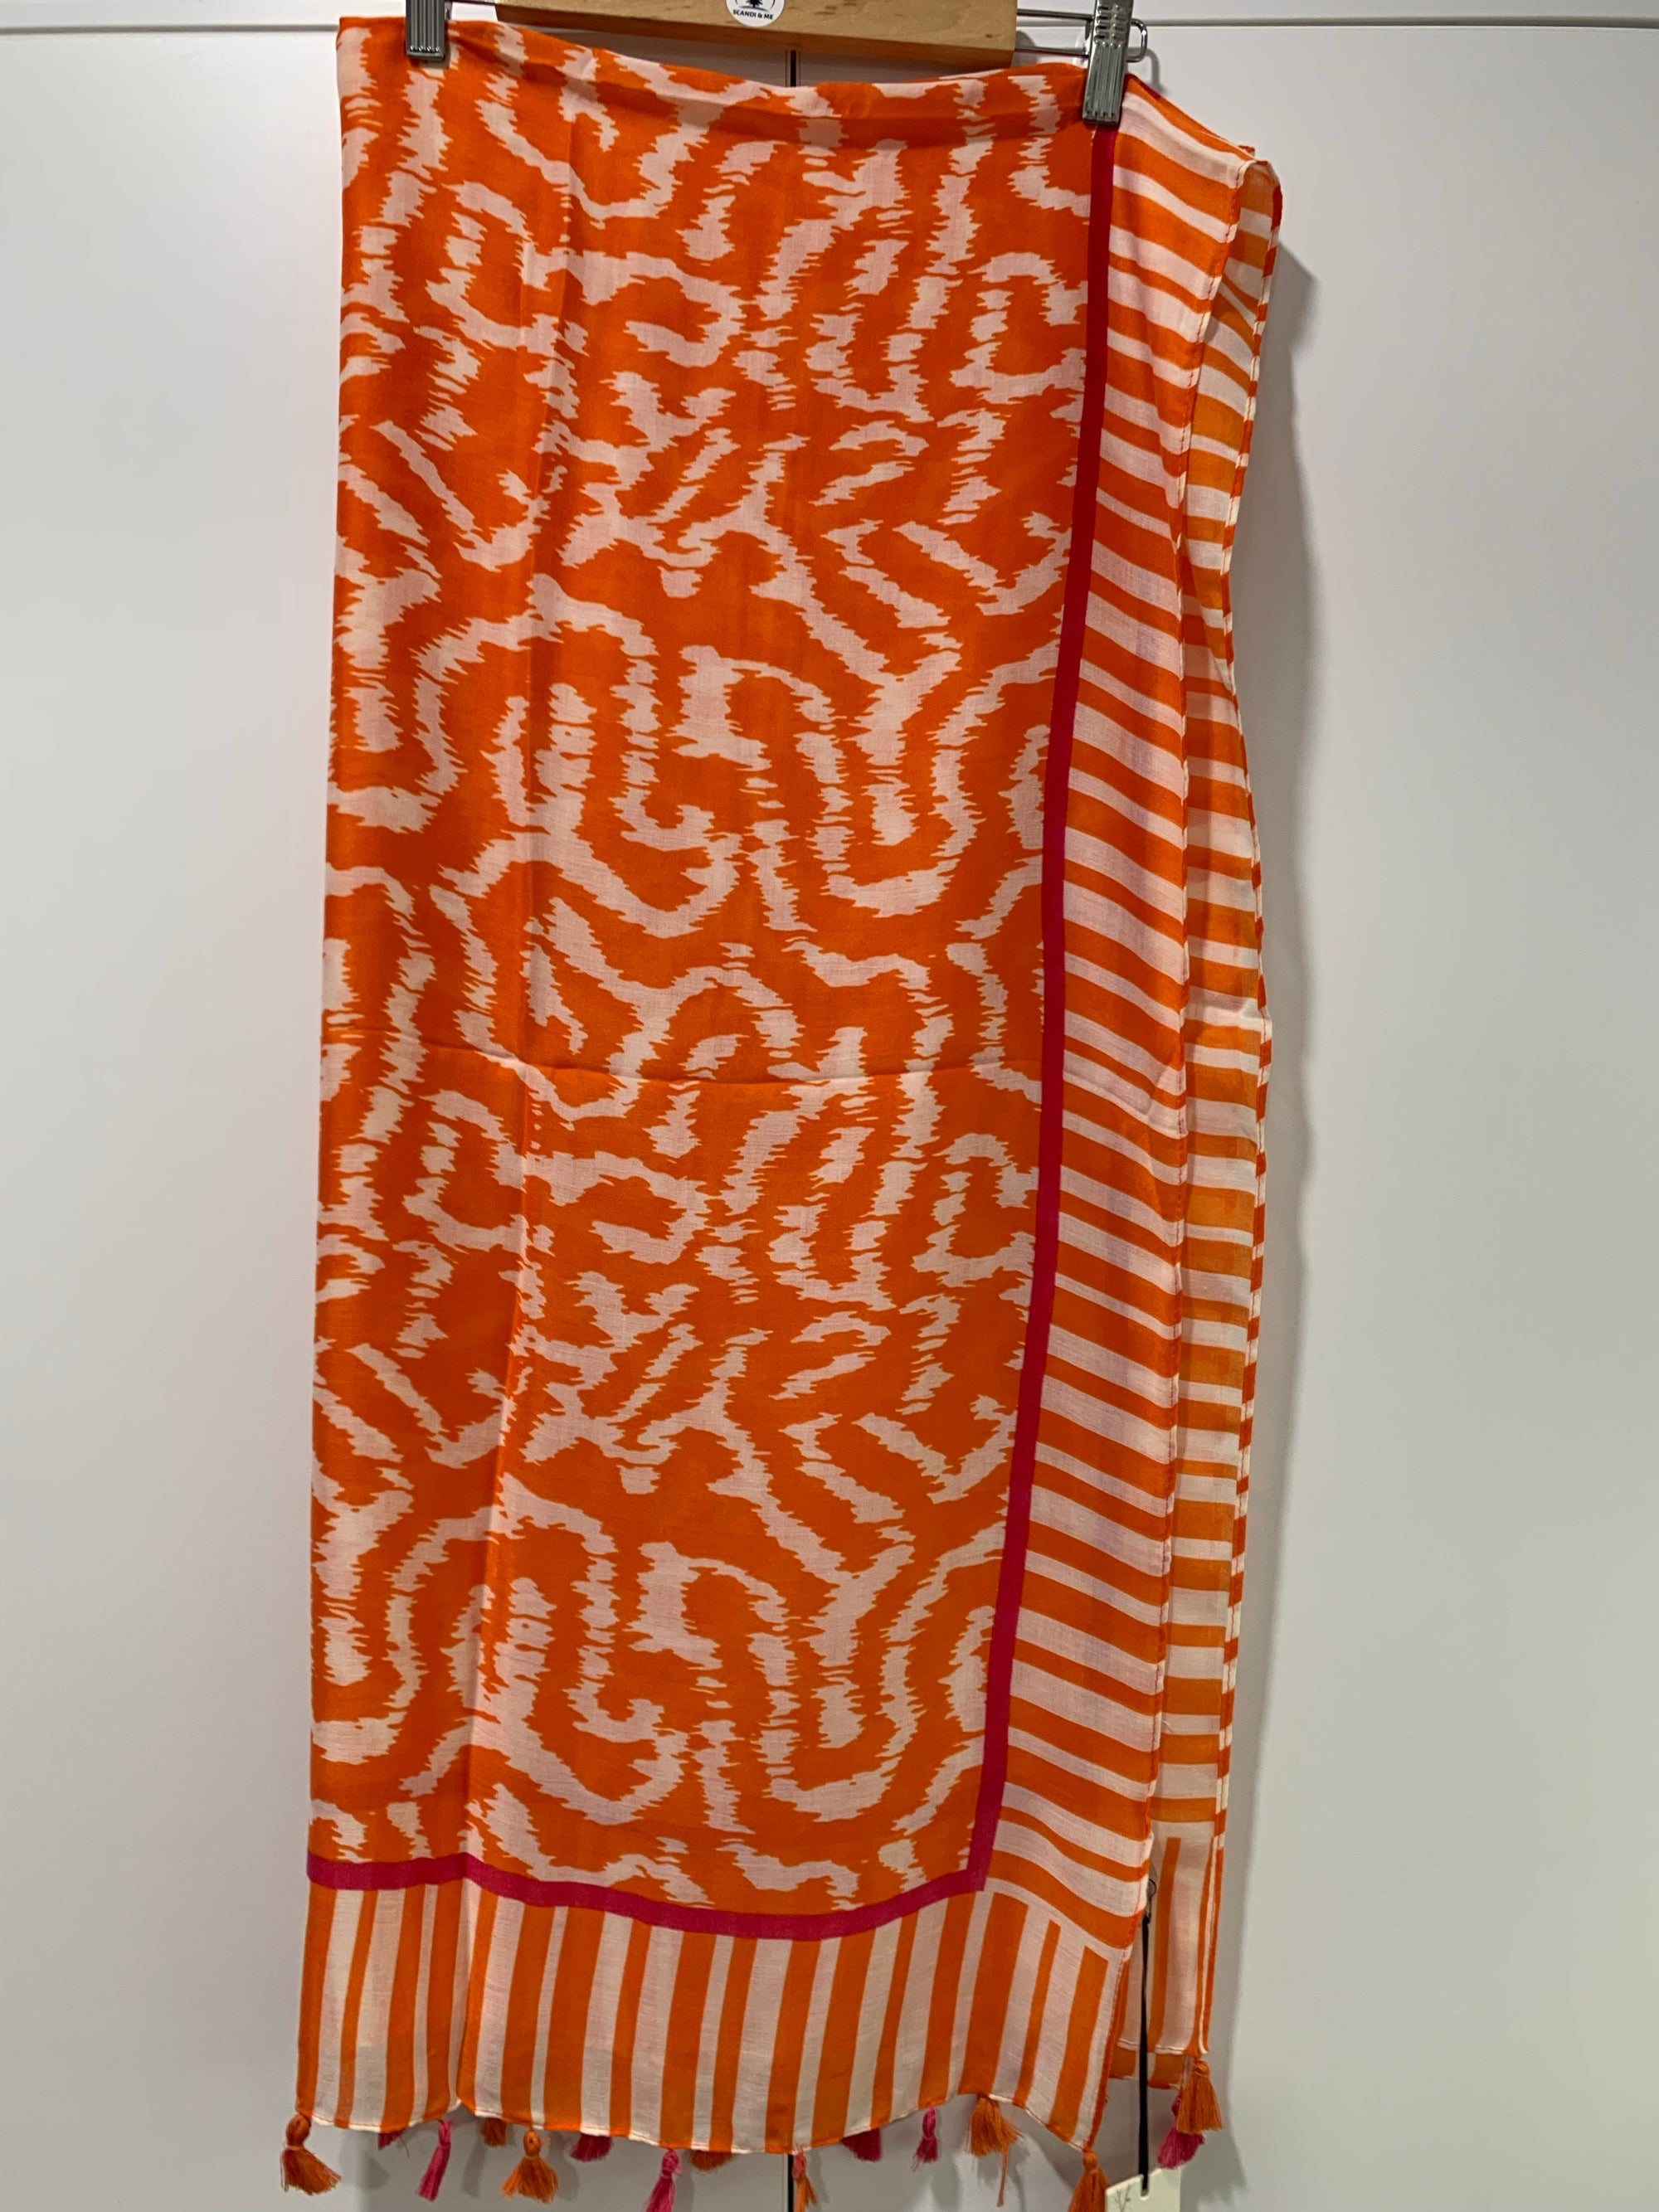 Oversized Scarf in Orange Pink & White Animal Print with Tassels - Willow Tree